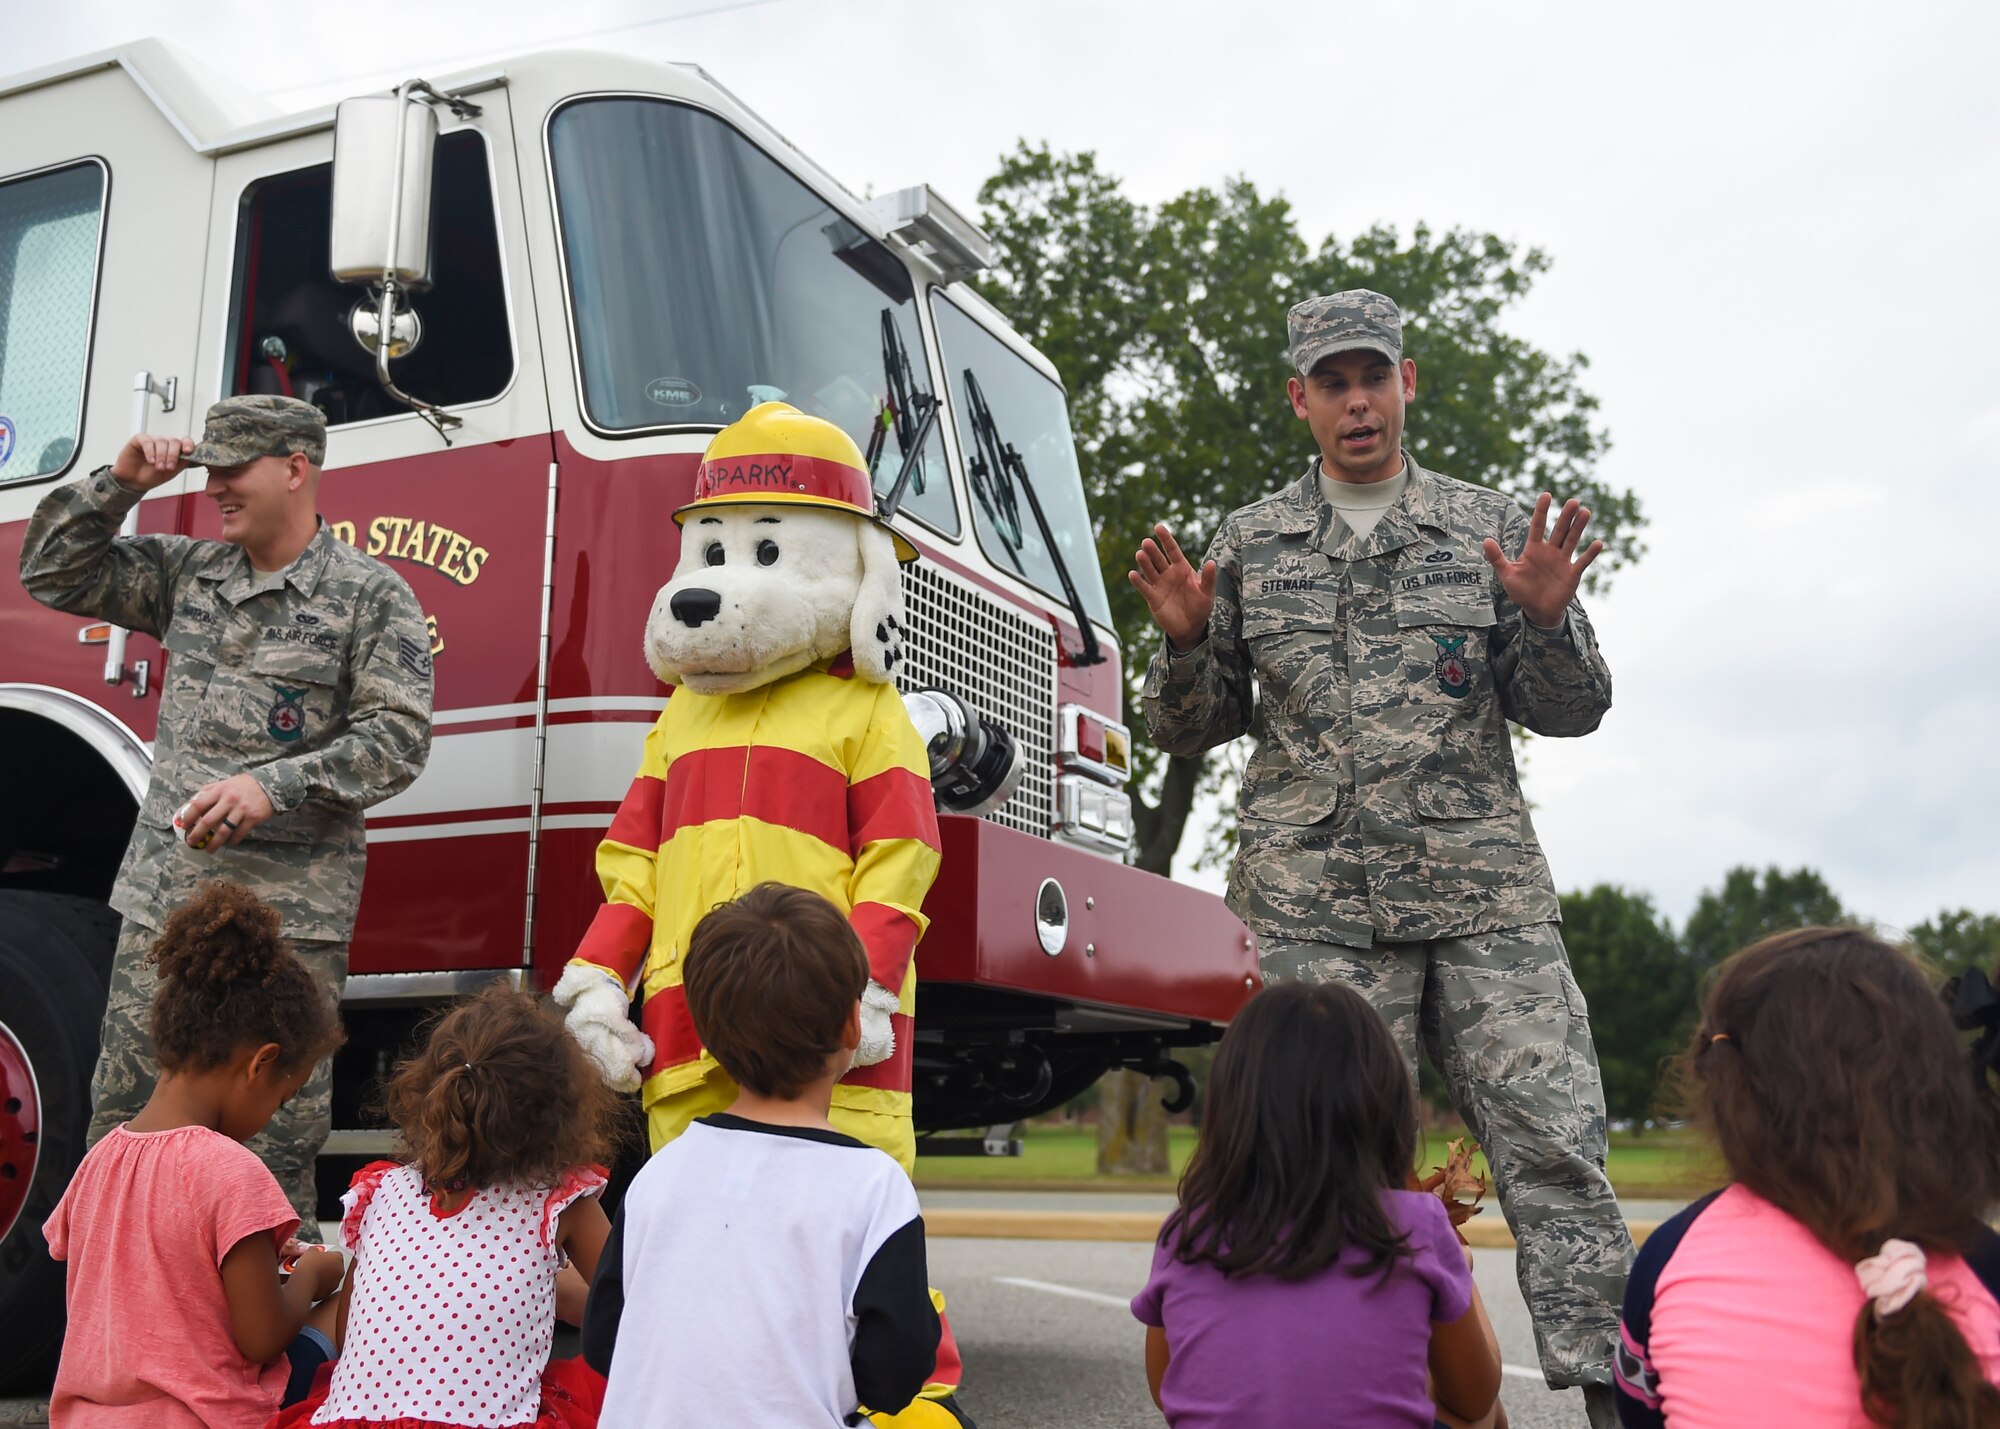 U.S. Air Force Airmen assigned to the 633rd Civil Engineer Squadron Fire Department, interact with children from the Child Development Center at Joint Base Langley-Eustis, Va., Oct. 10, 2017.